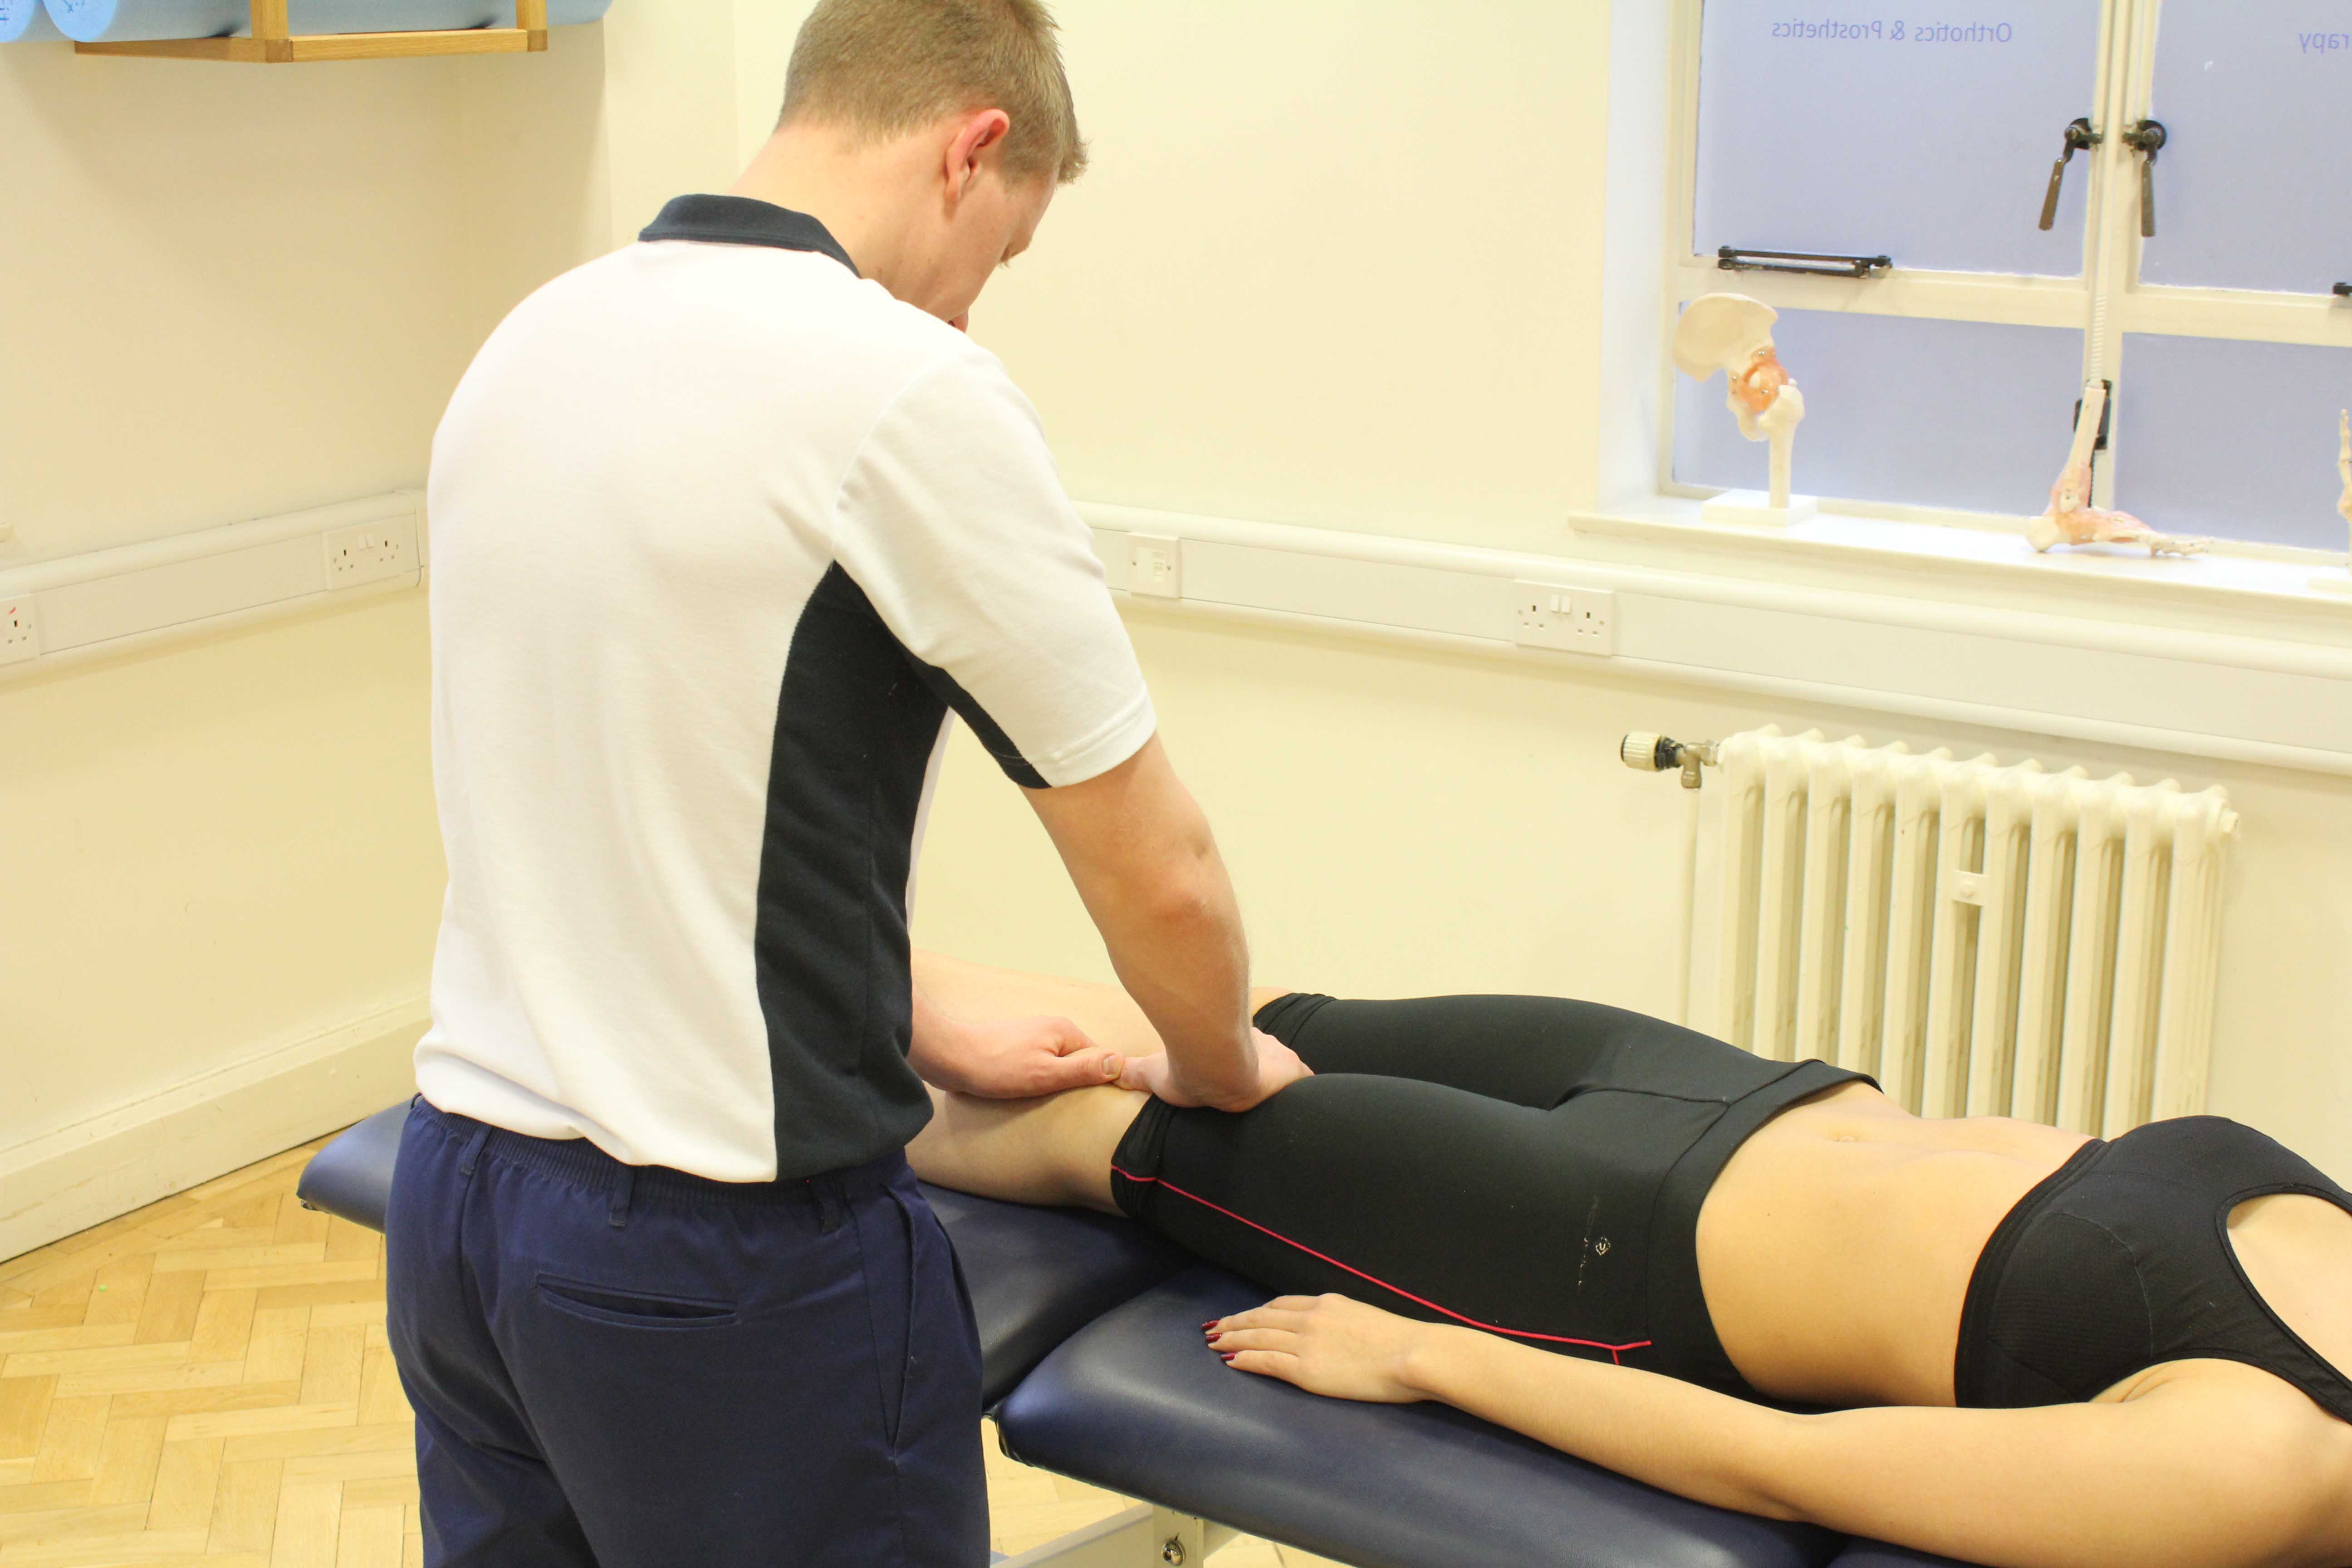 Mobilisations of the patella by experienced MSK therapist